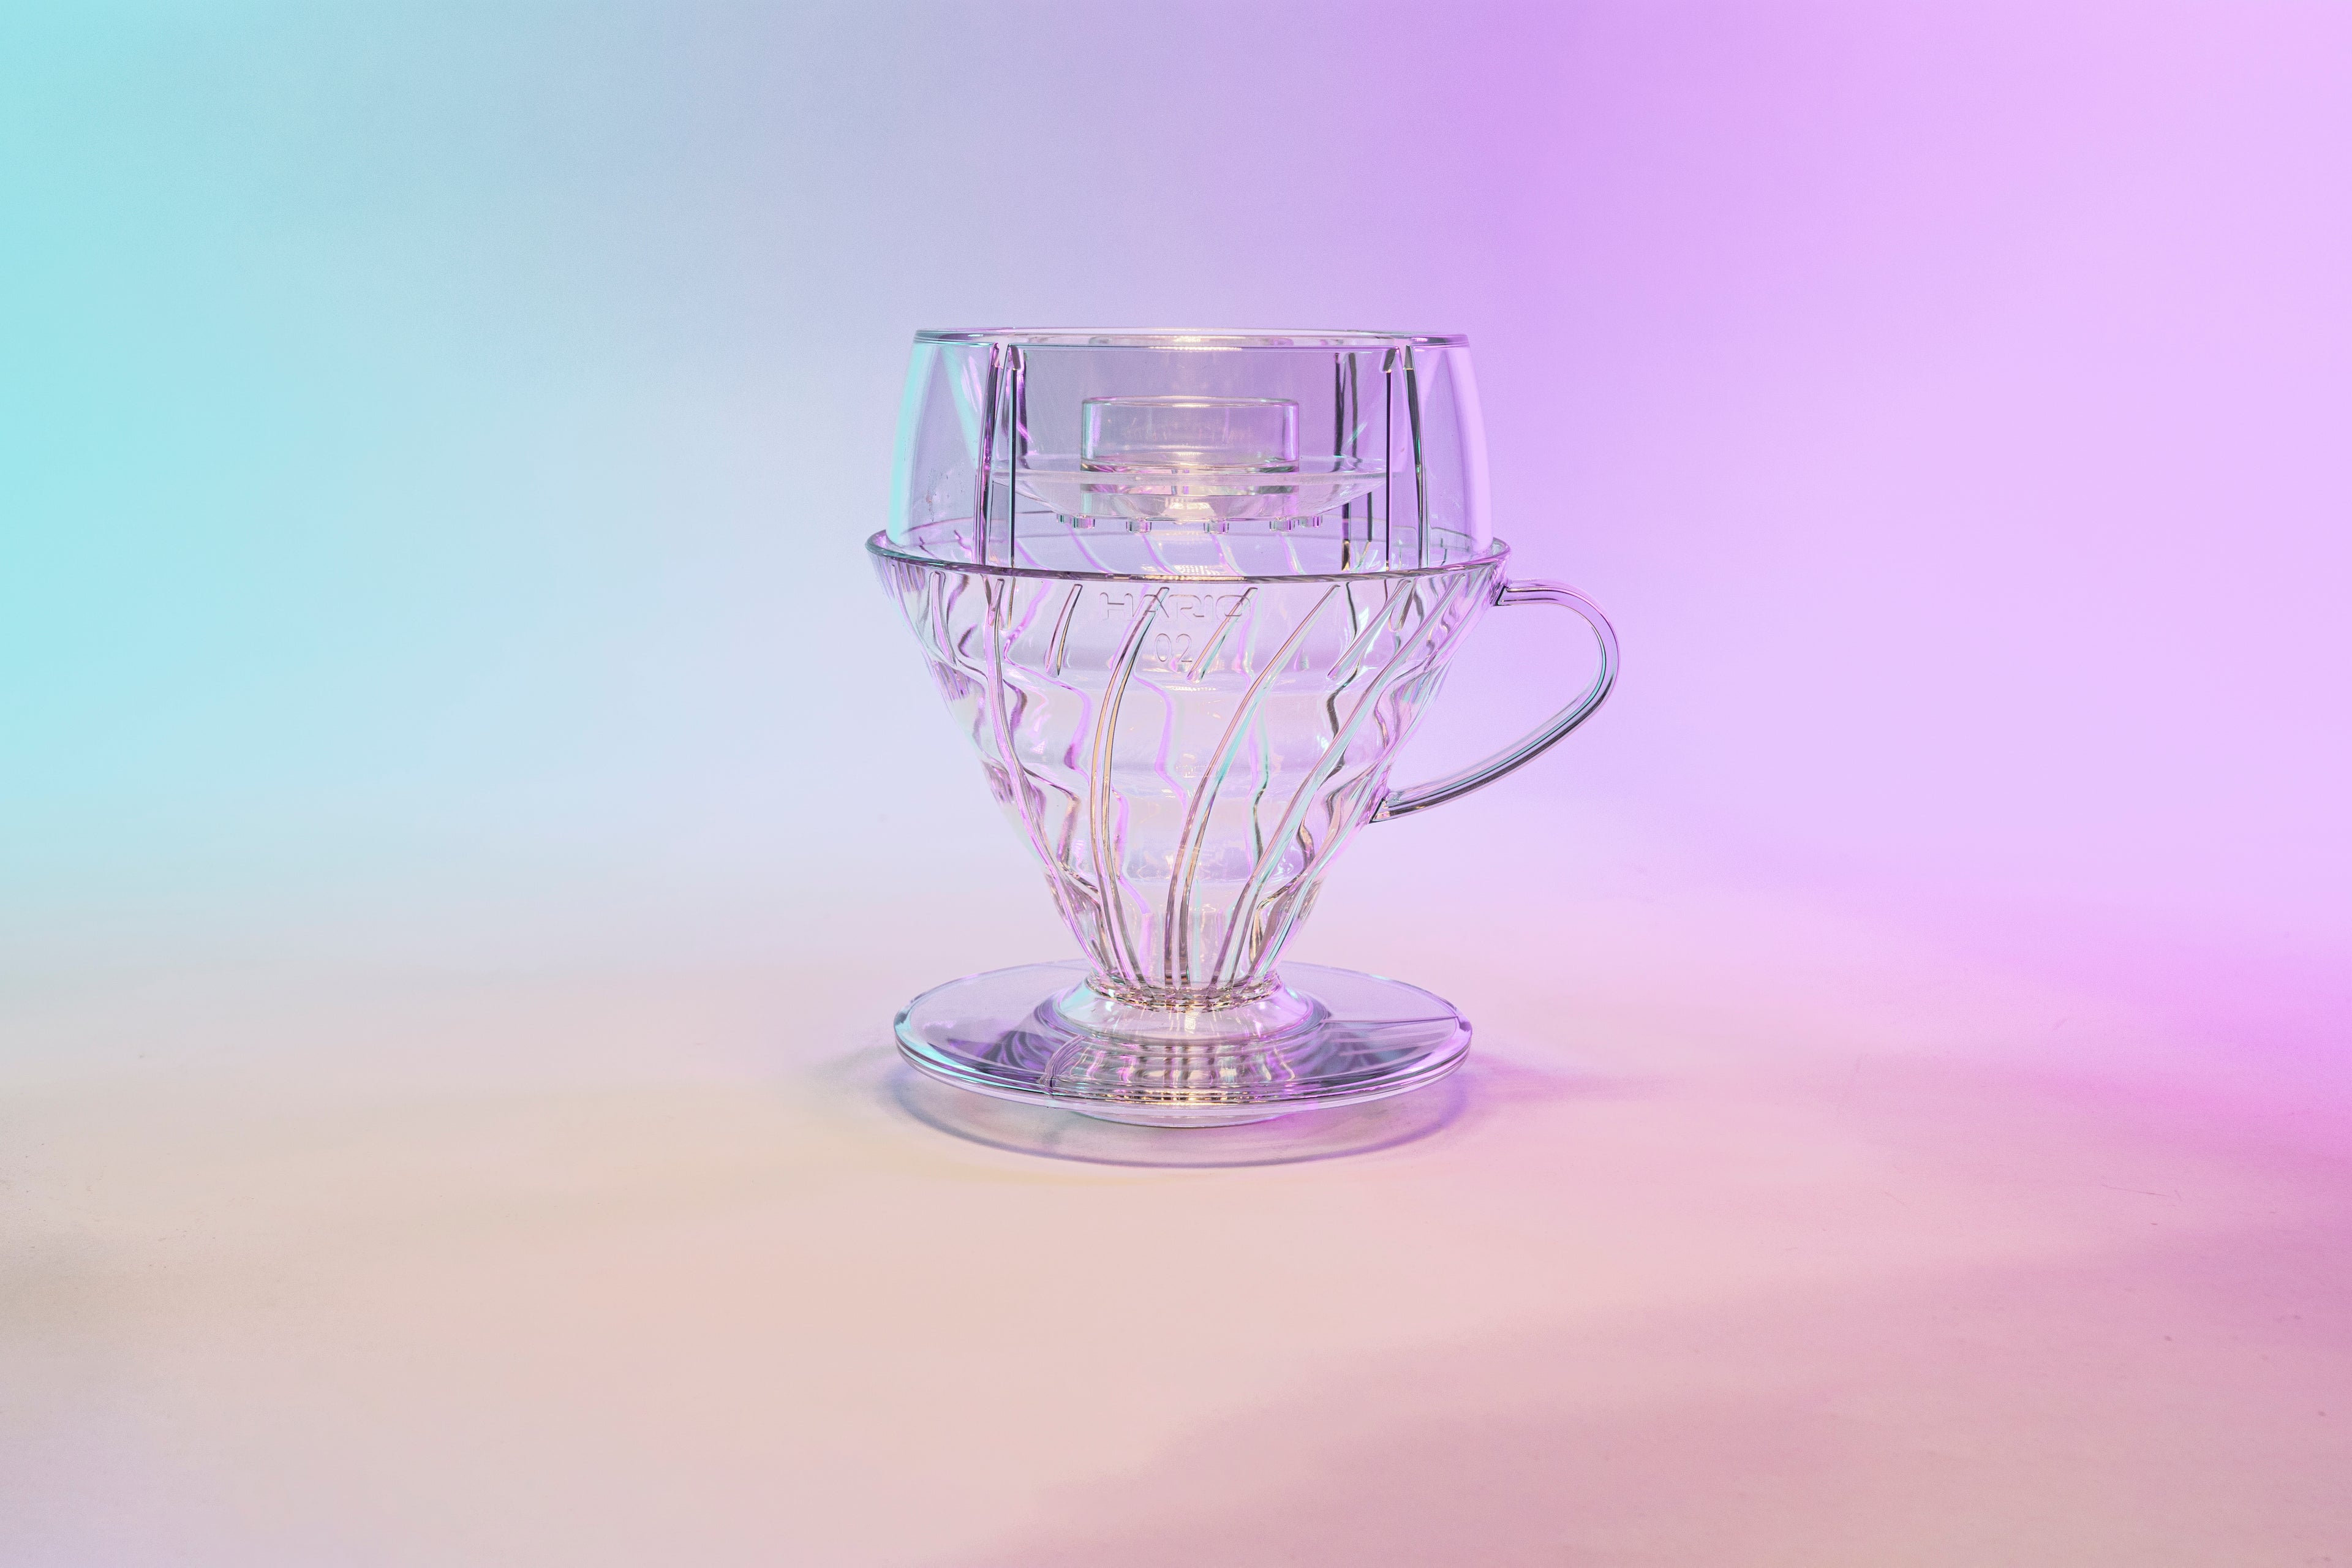 Clear plastic cone shaped dripper with clear plastic round drip assist seated on top and set against a blue and purple gradient background.